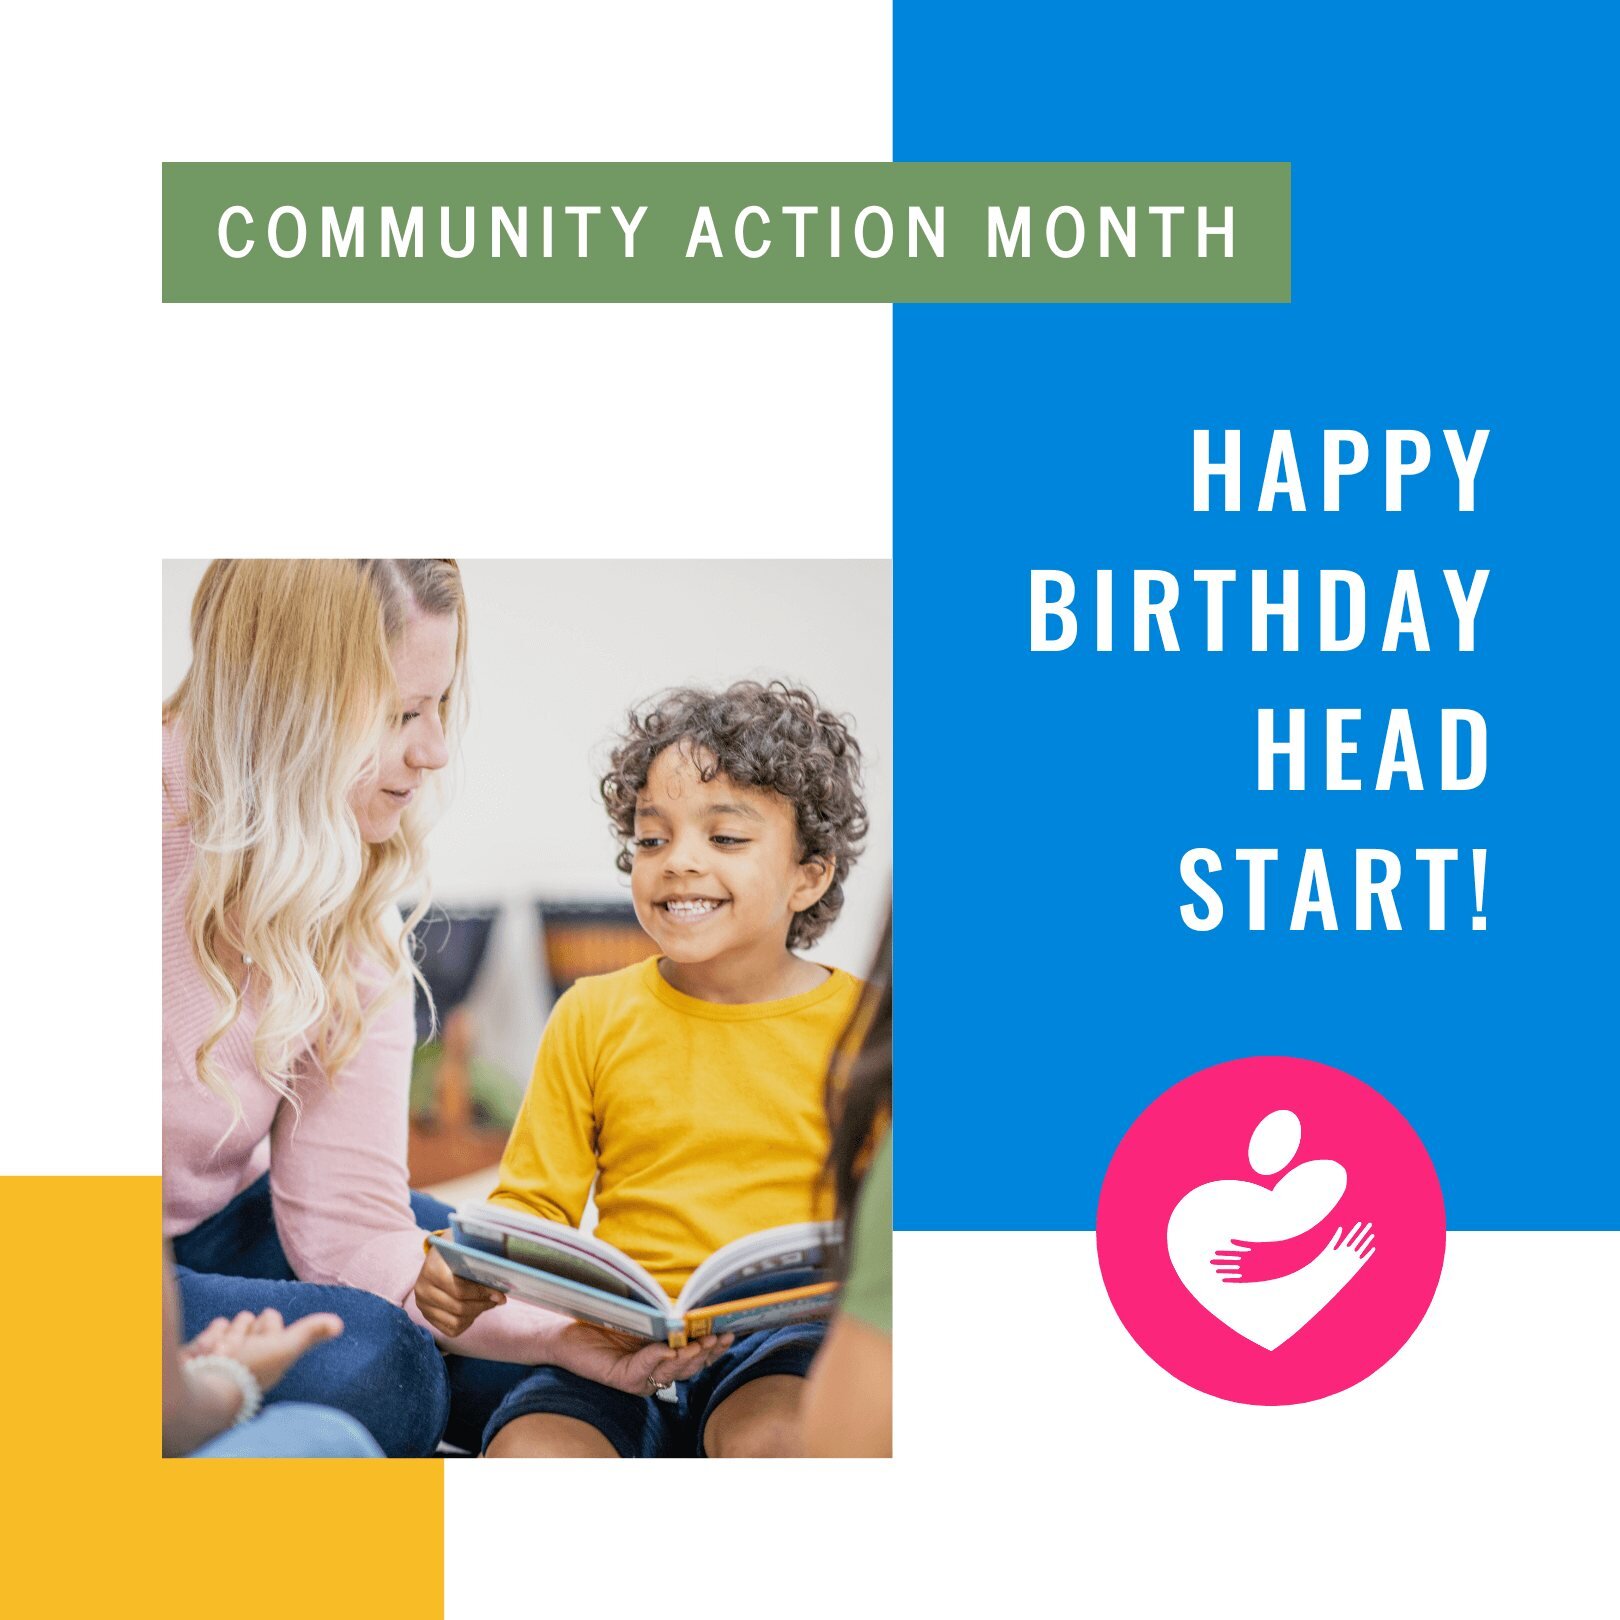 Happy birthday, Head Start! For 58 years #HeadStart has been
providing comprehensive early childhood education, health,
nutrition, and parent involvement services to children and
families. #HappyBirthdayHeadStart